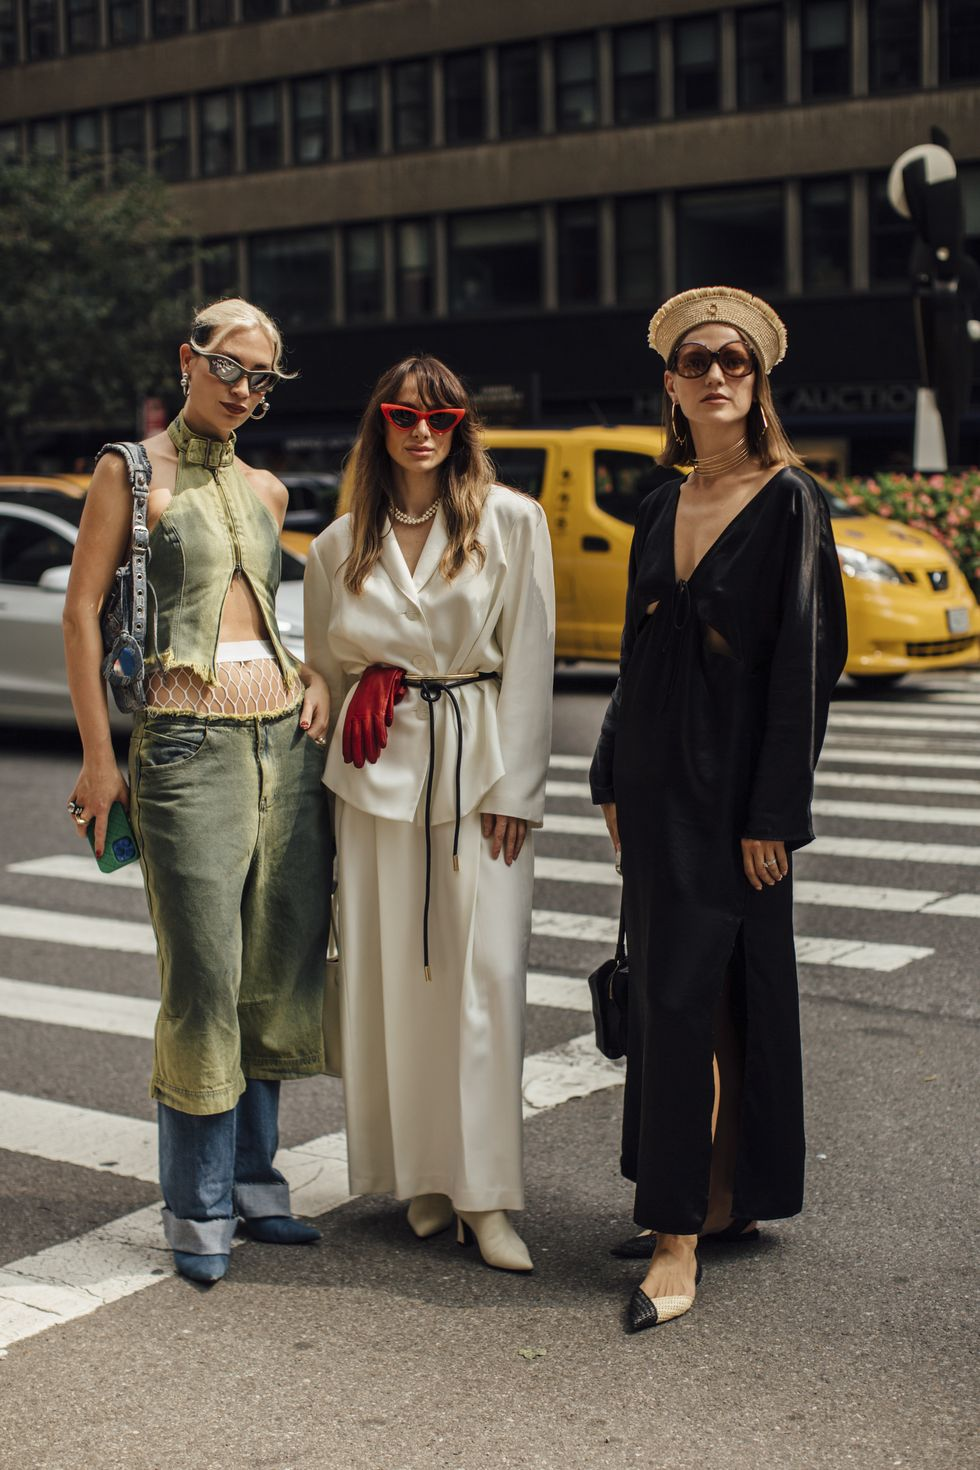 3 models looks really good on NYC streets